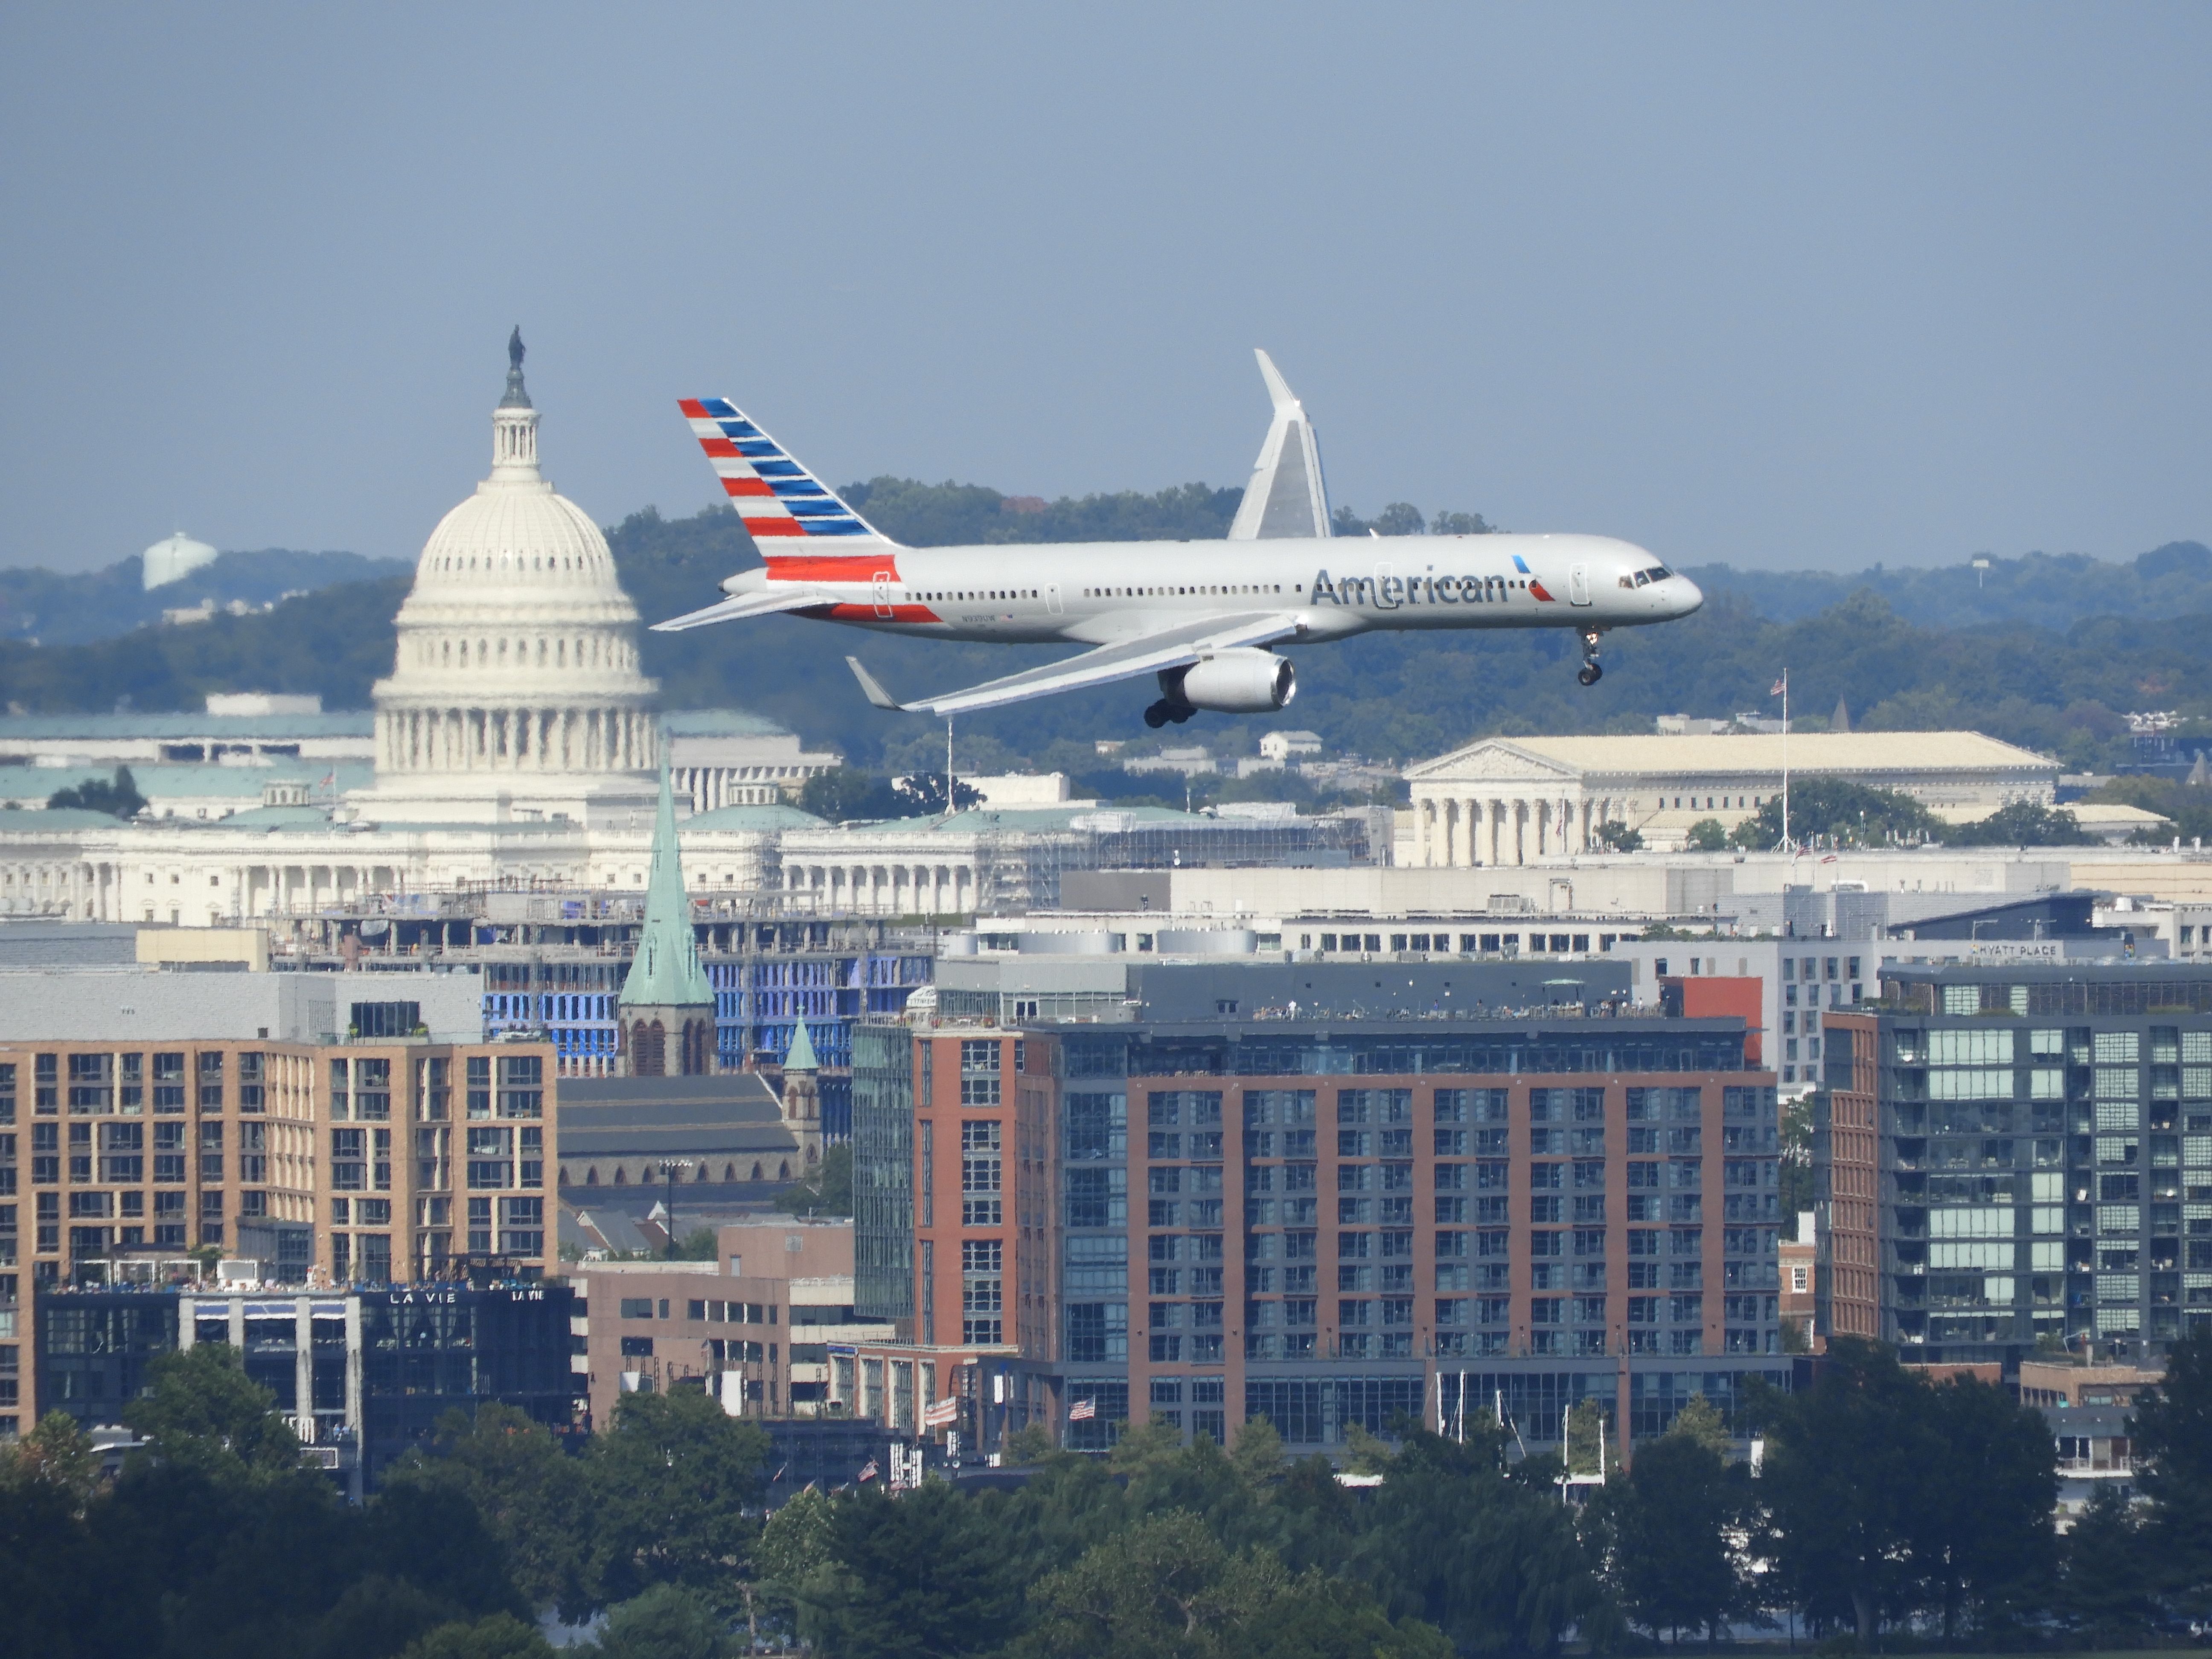 An American Airlines Boeing 757 making its turn on short final to Runway 19 at DCA Airport.